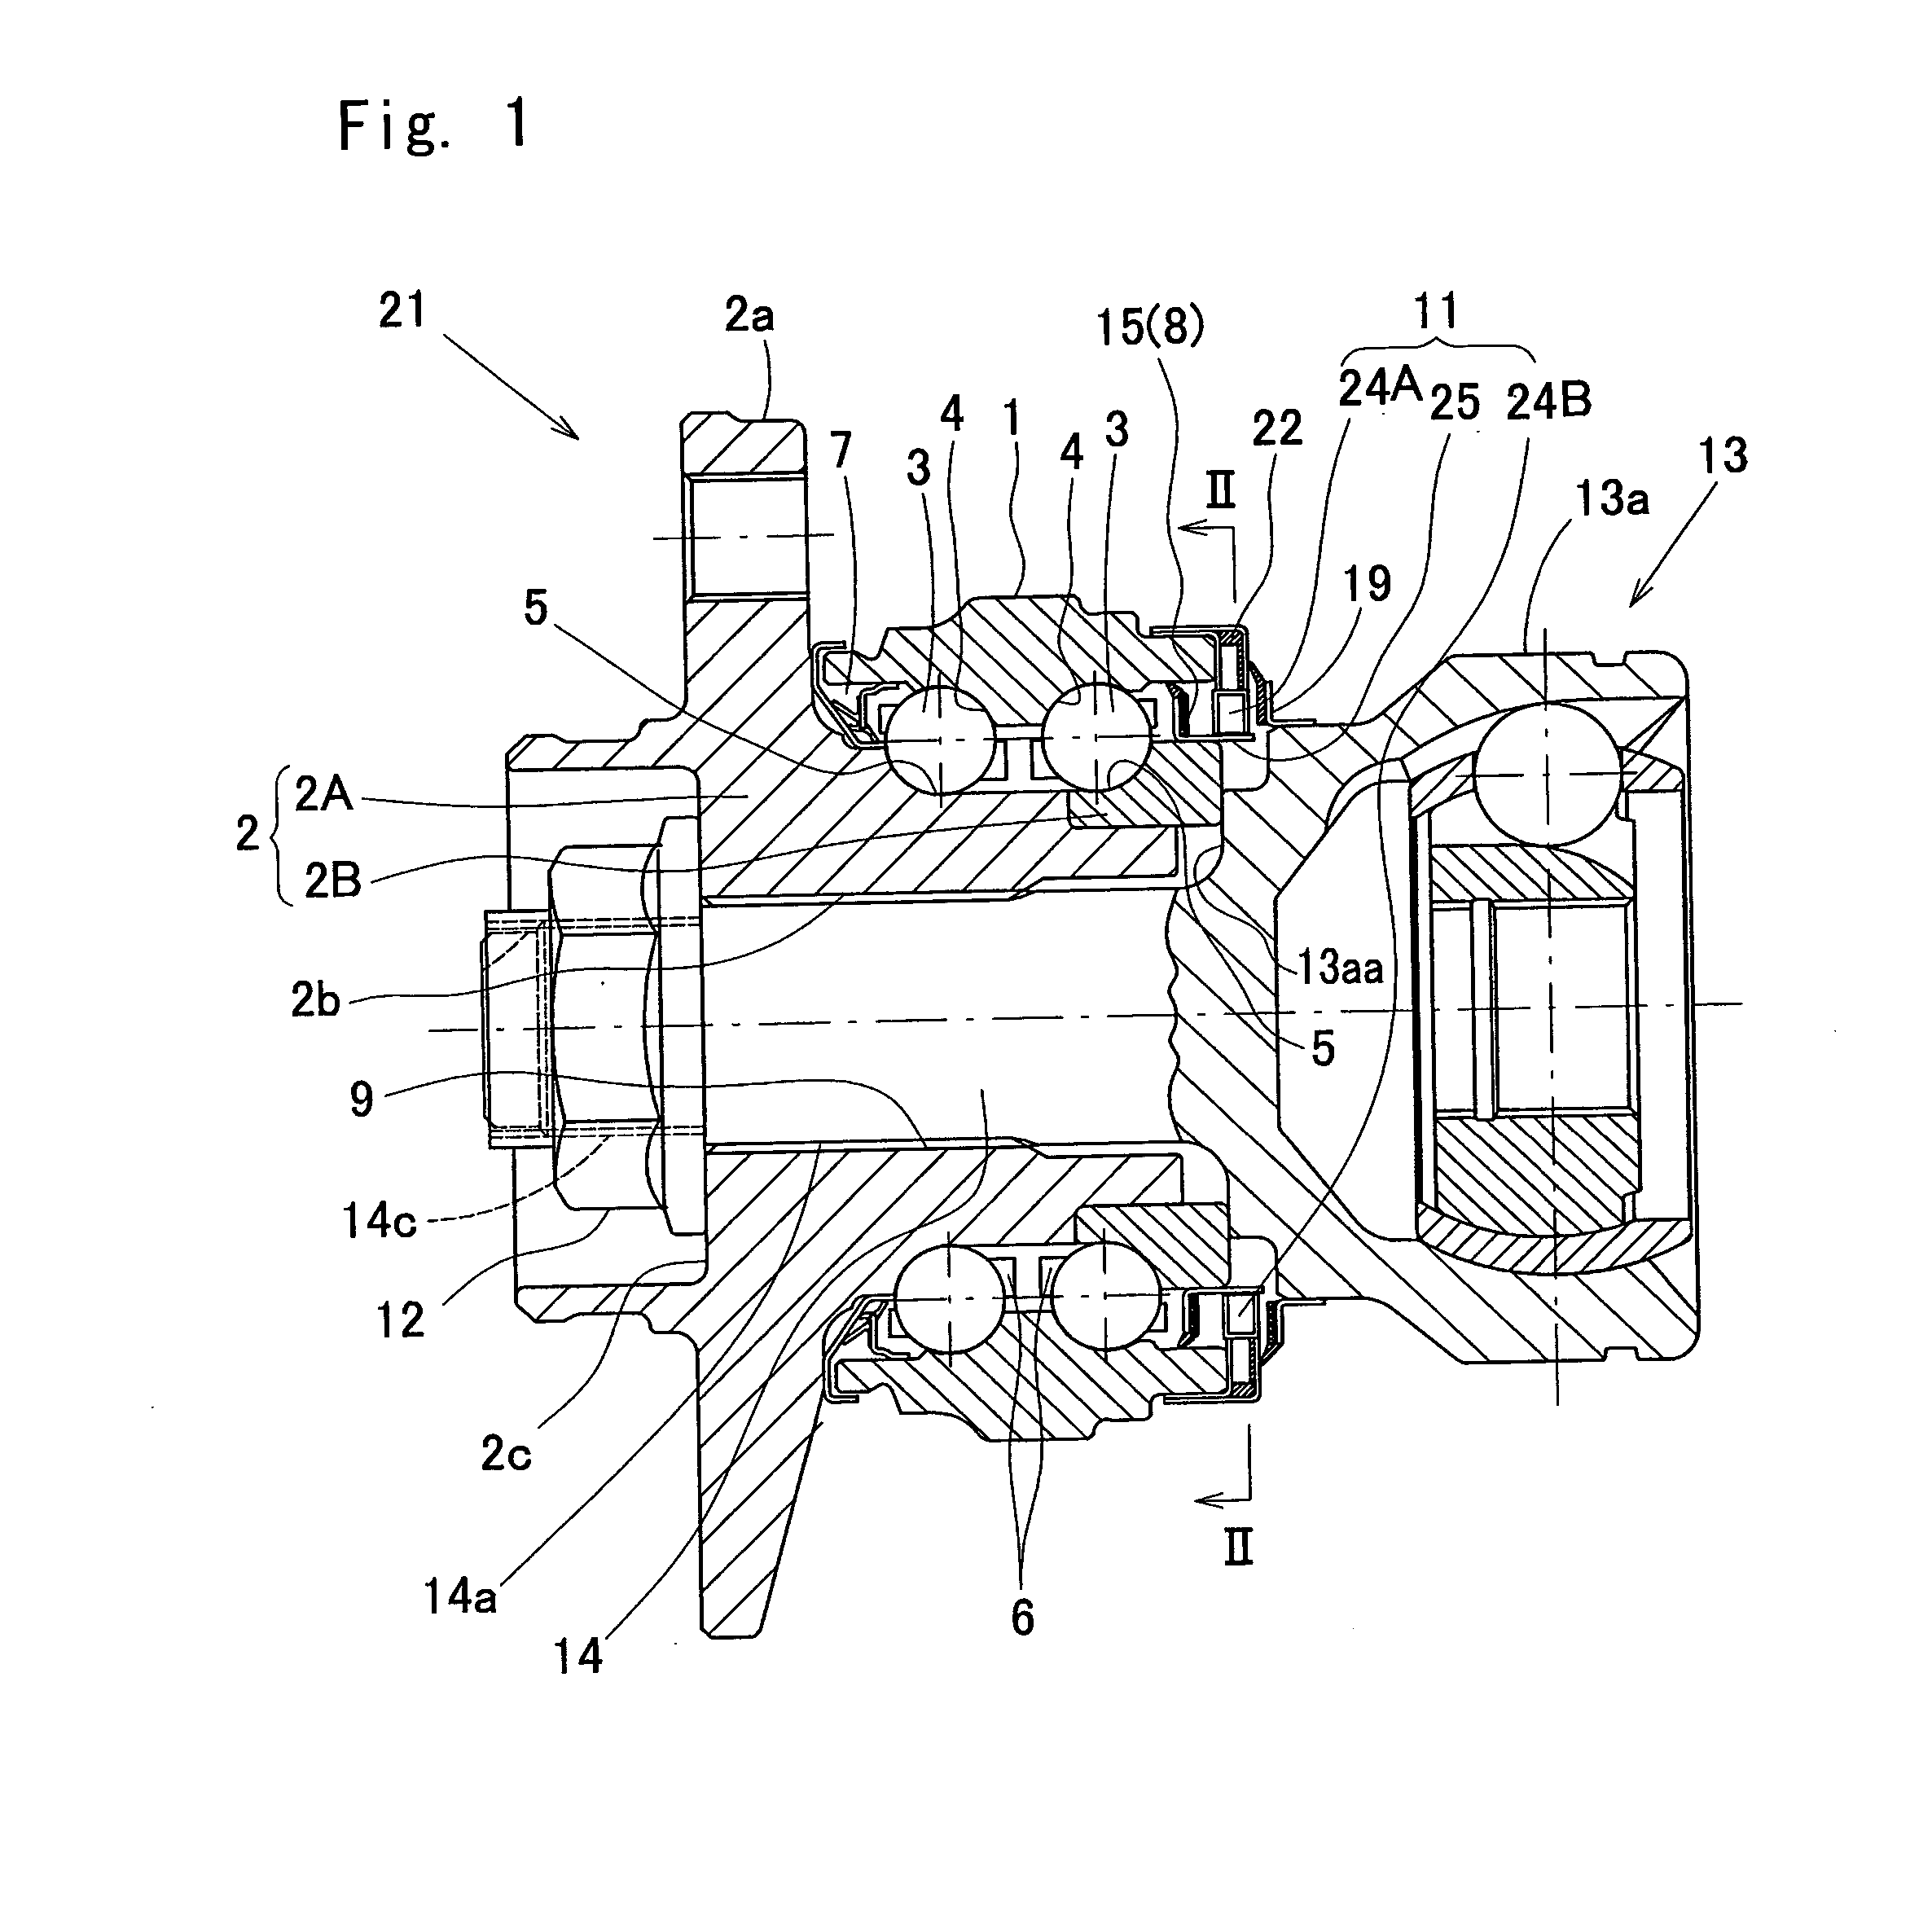 Sensor-equipped wheel support bearing assembly